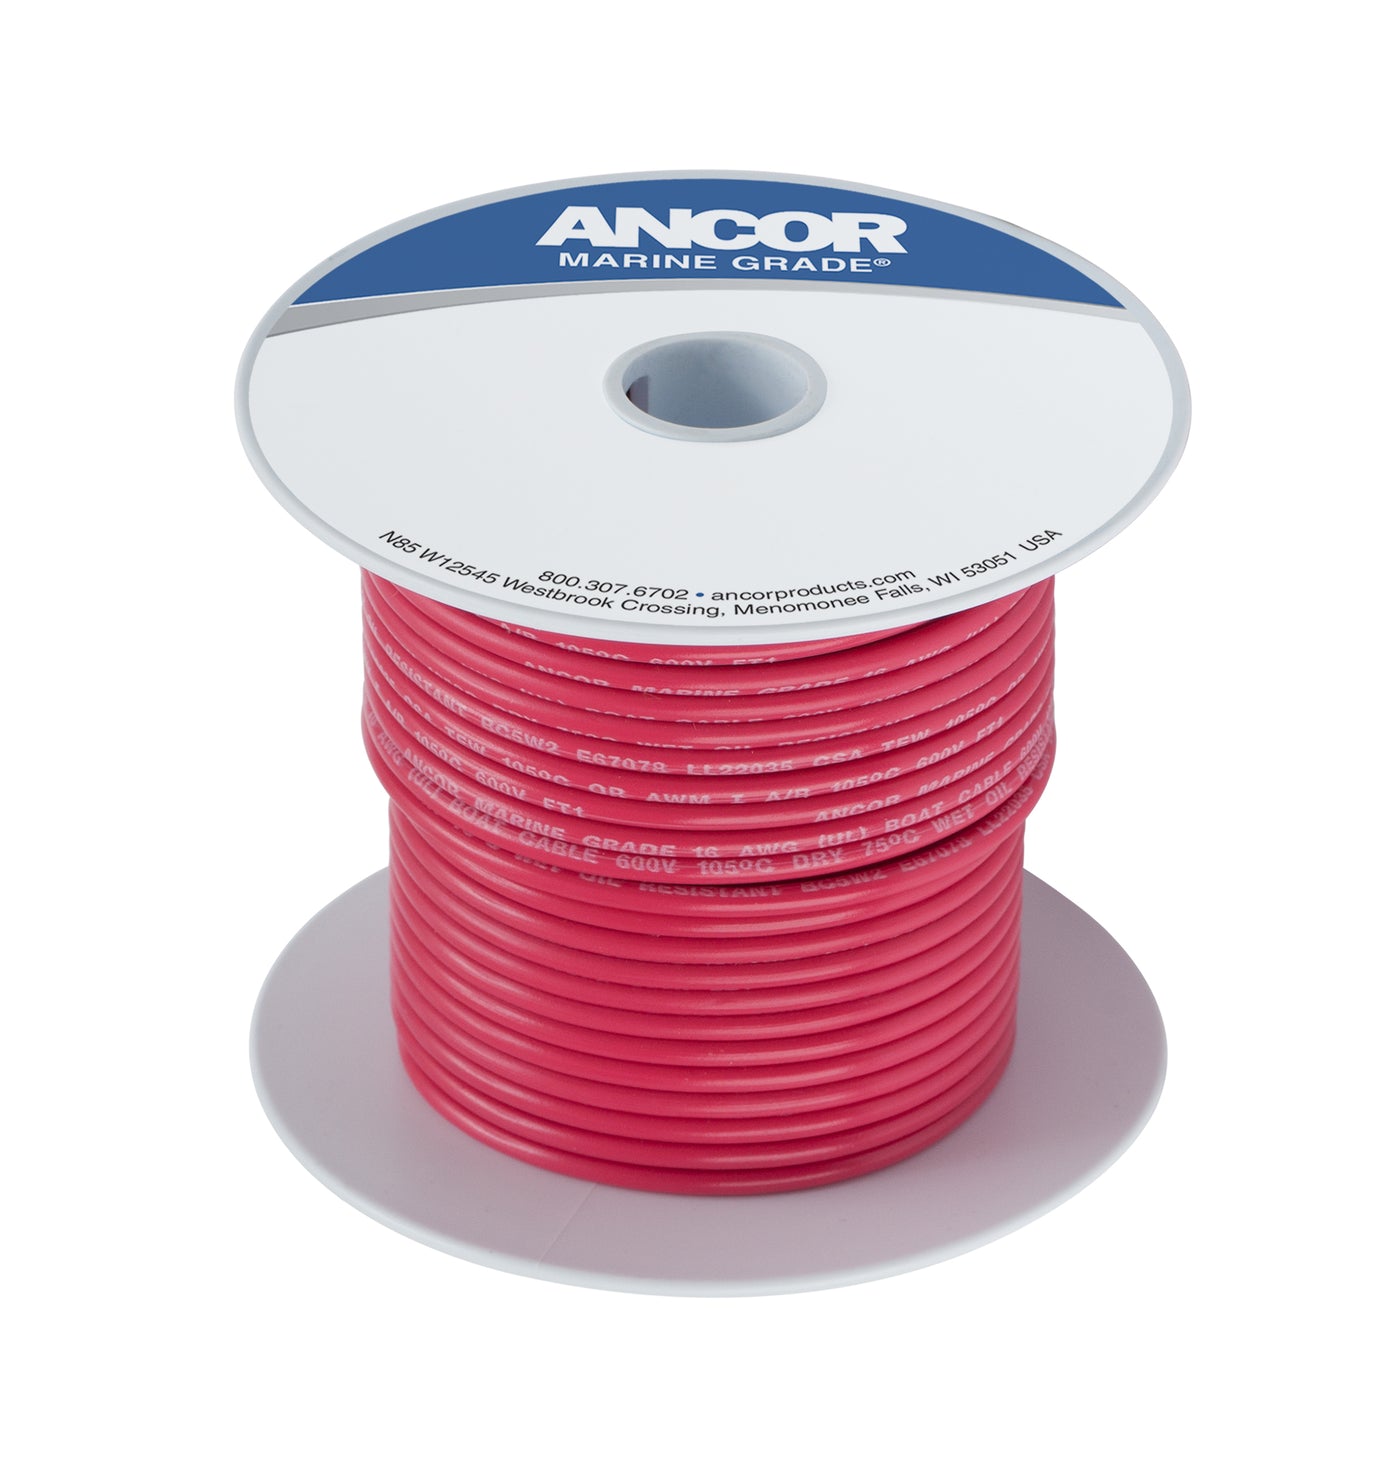 Ancor 111550 Tinned Copper Wire, 8 AWG (8mm²), Red - 500ft